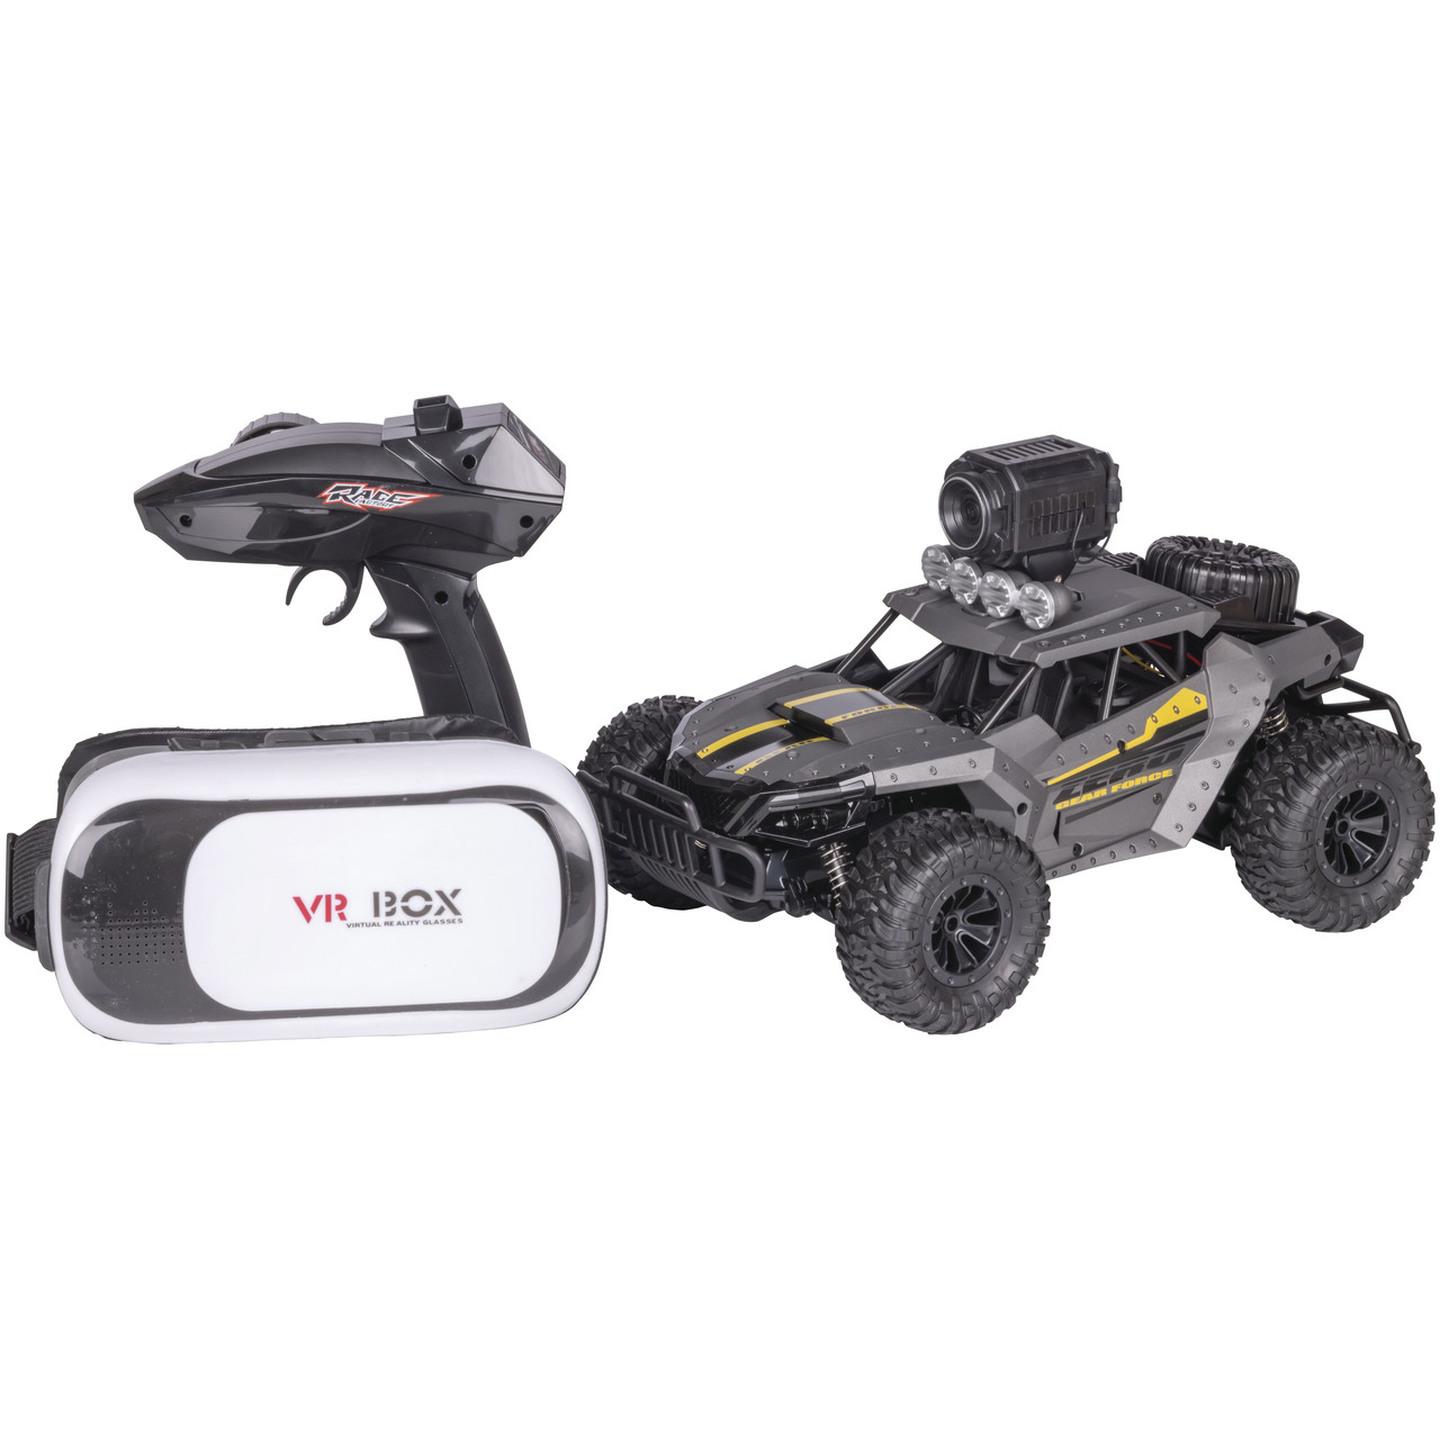 1:16 R/C Car with 1080p Camera & VR Goggles